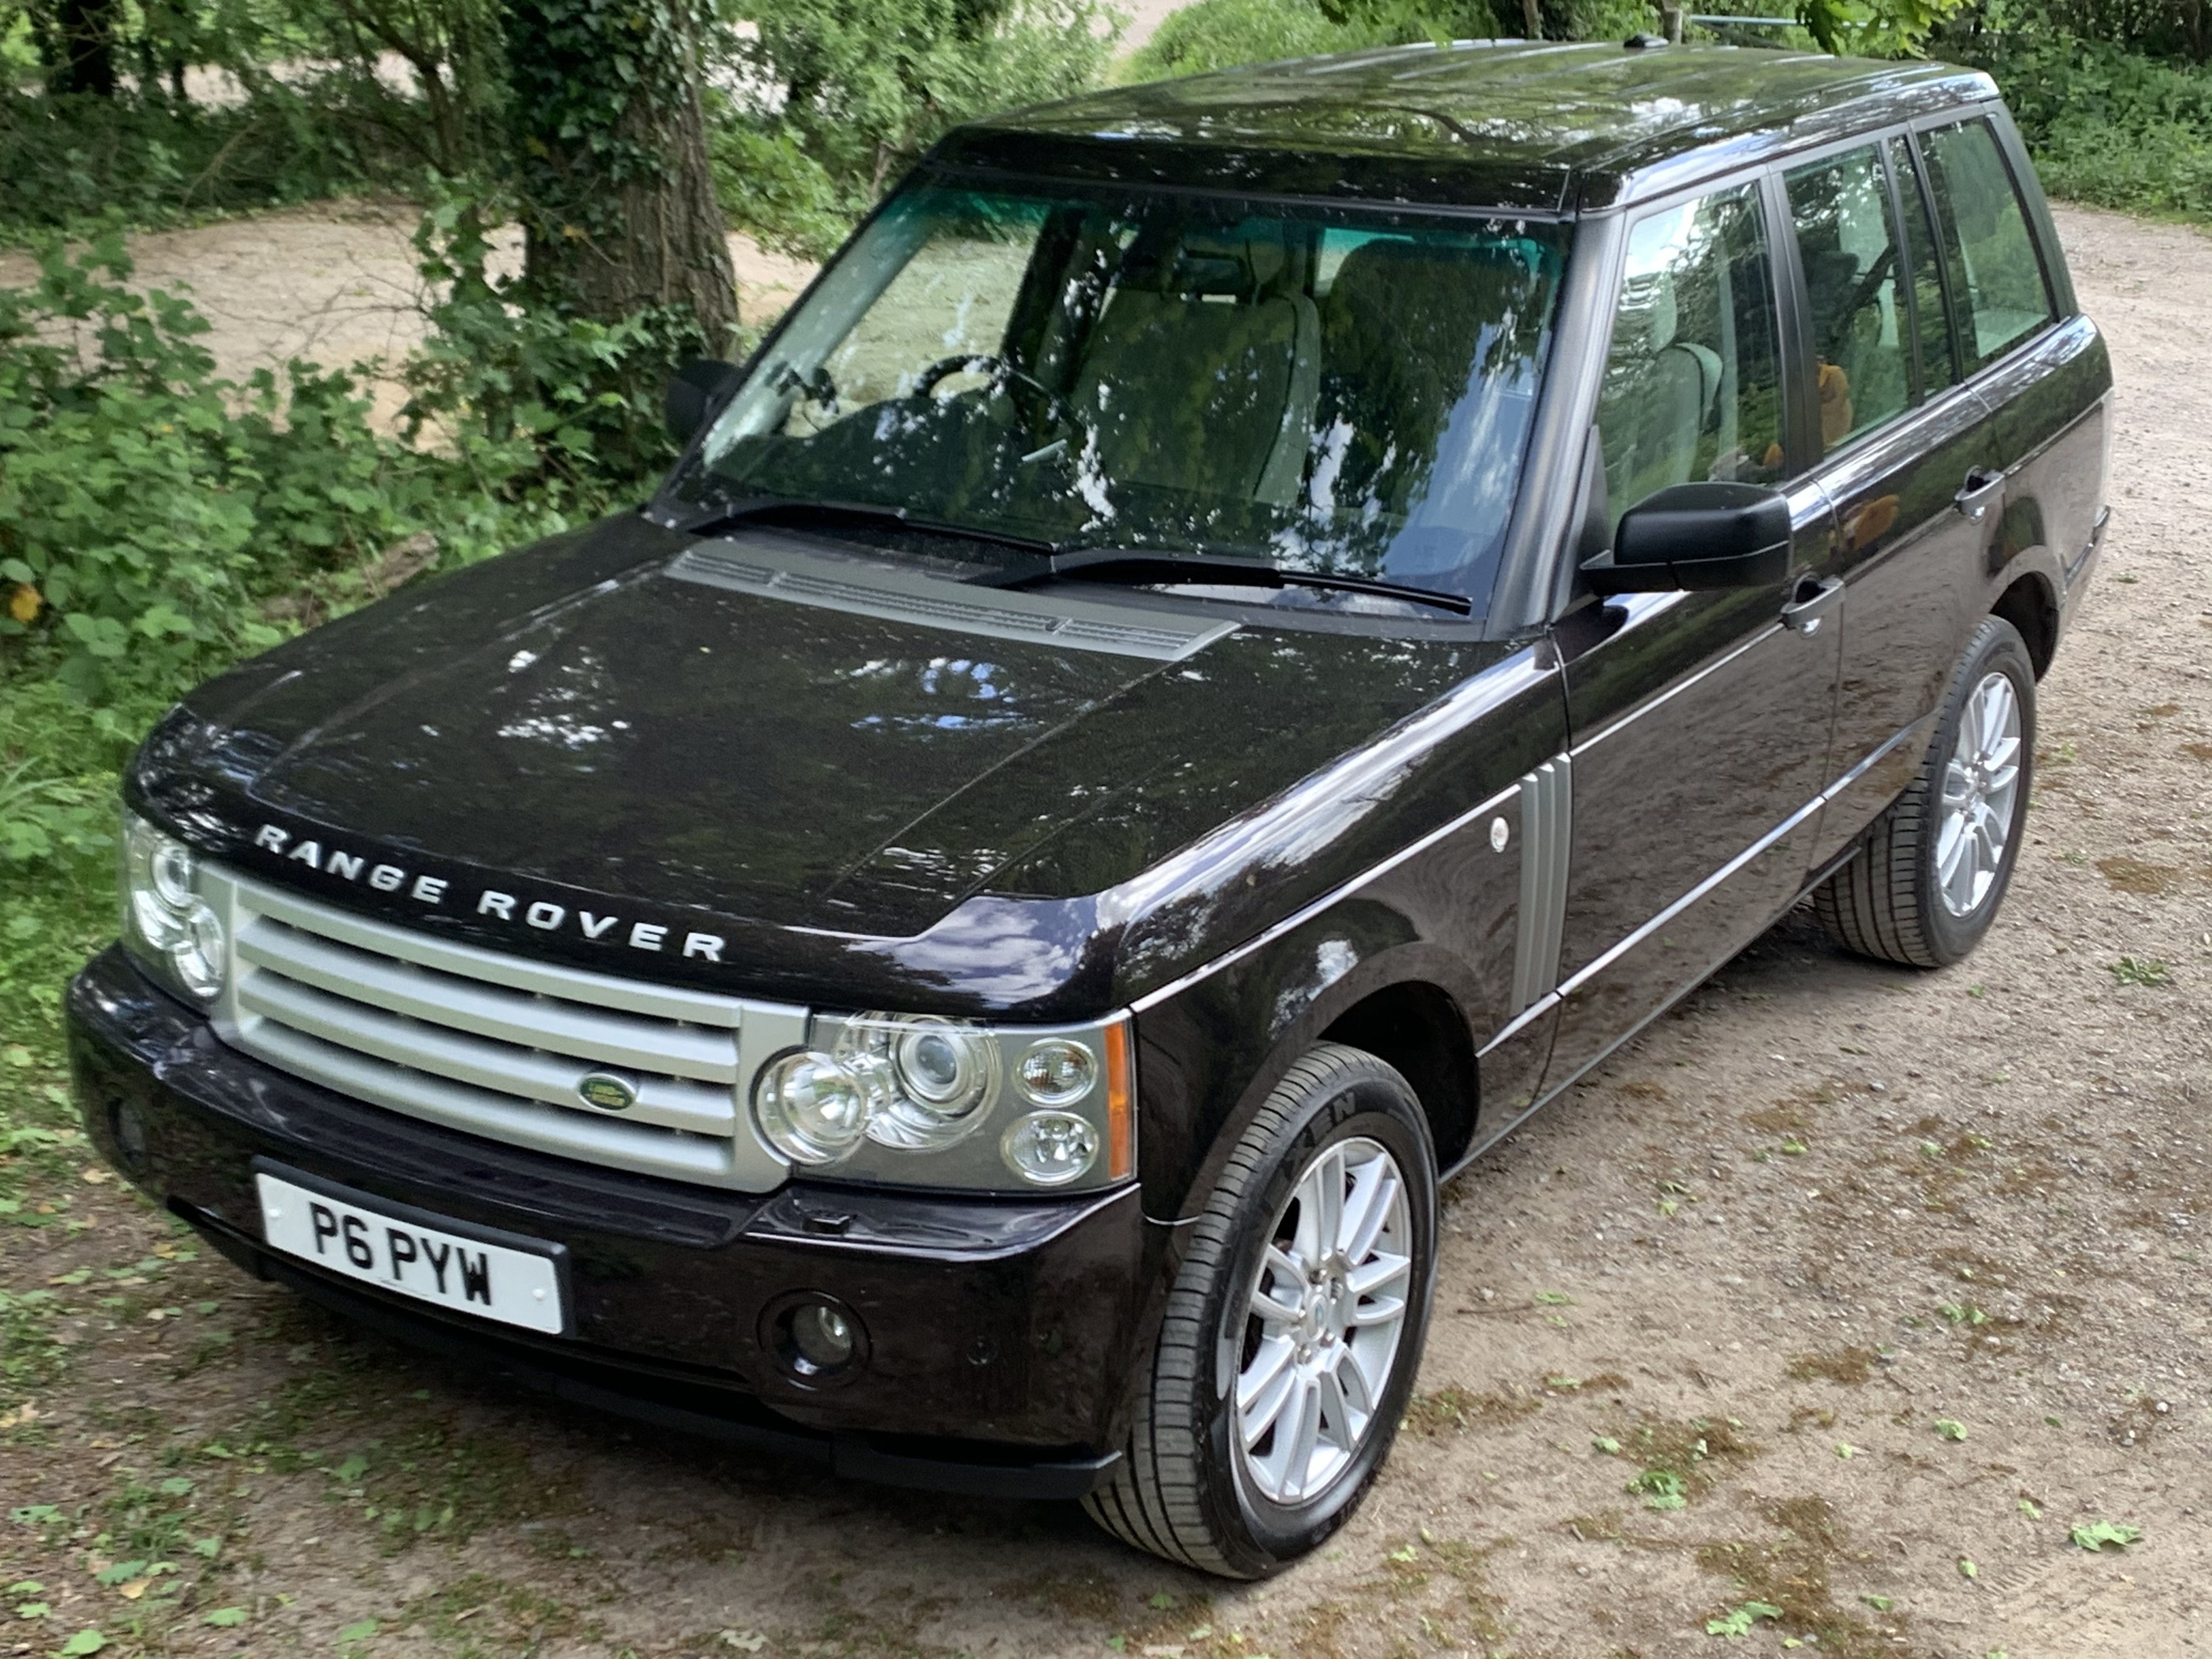 I’ve bought a 2009 Range Rover Vogue! - Page 1 - Readers' Cars - PistonHeads